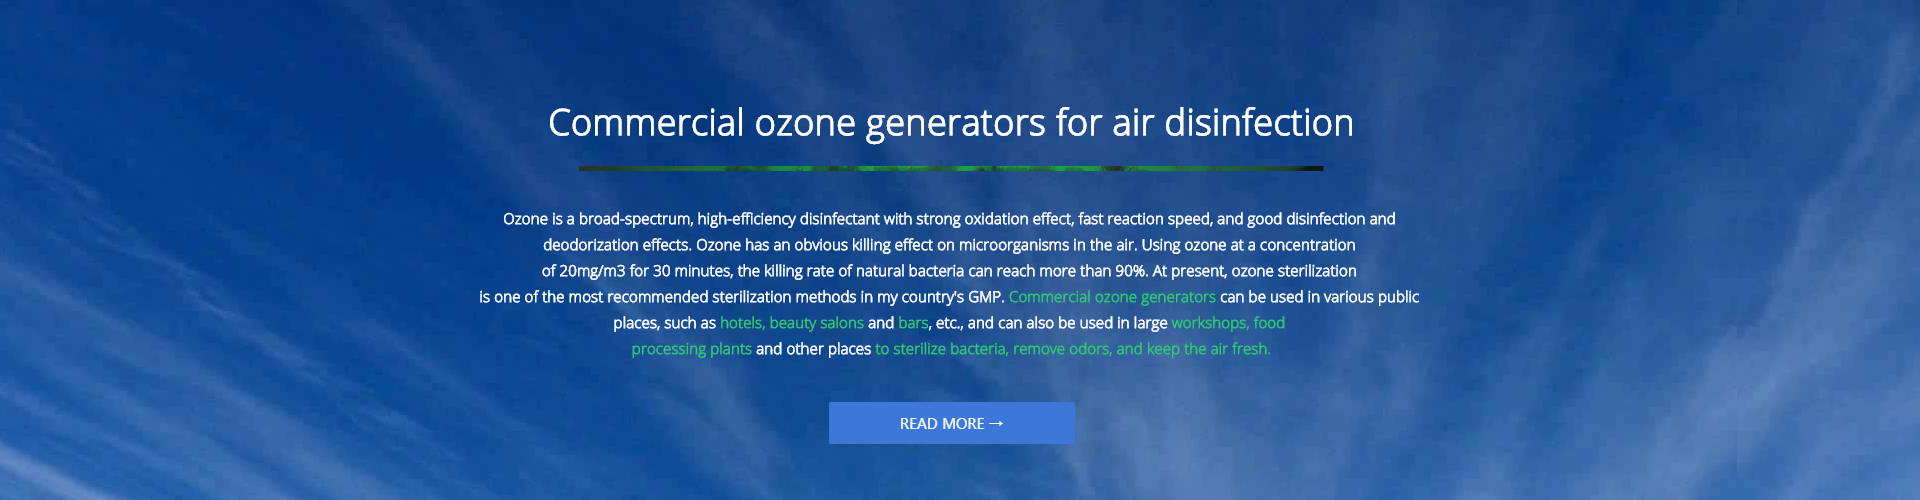 Commercial ozone generators for air disinfection